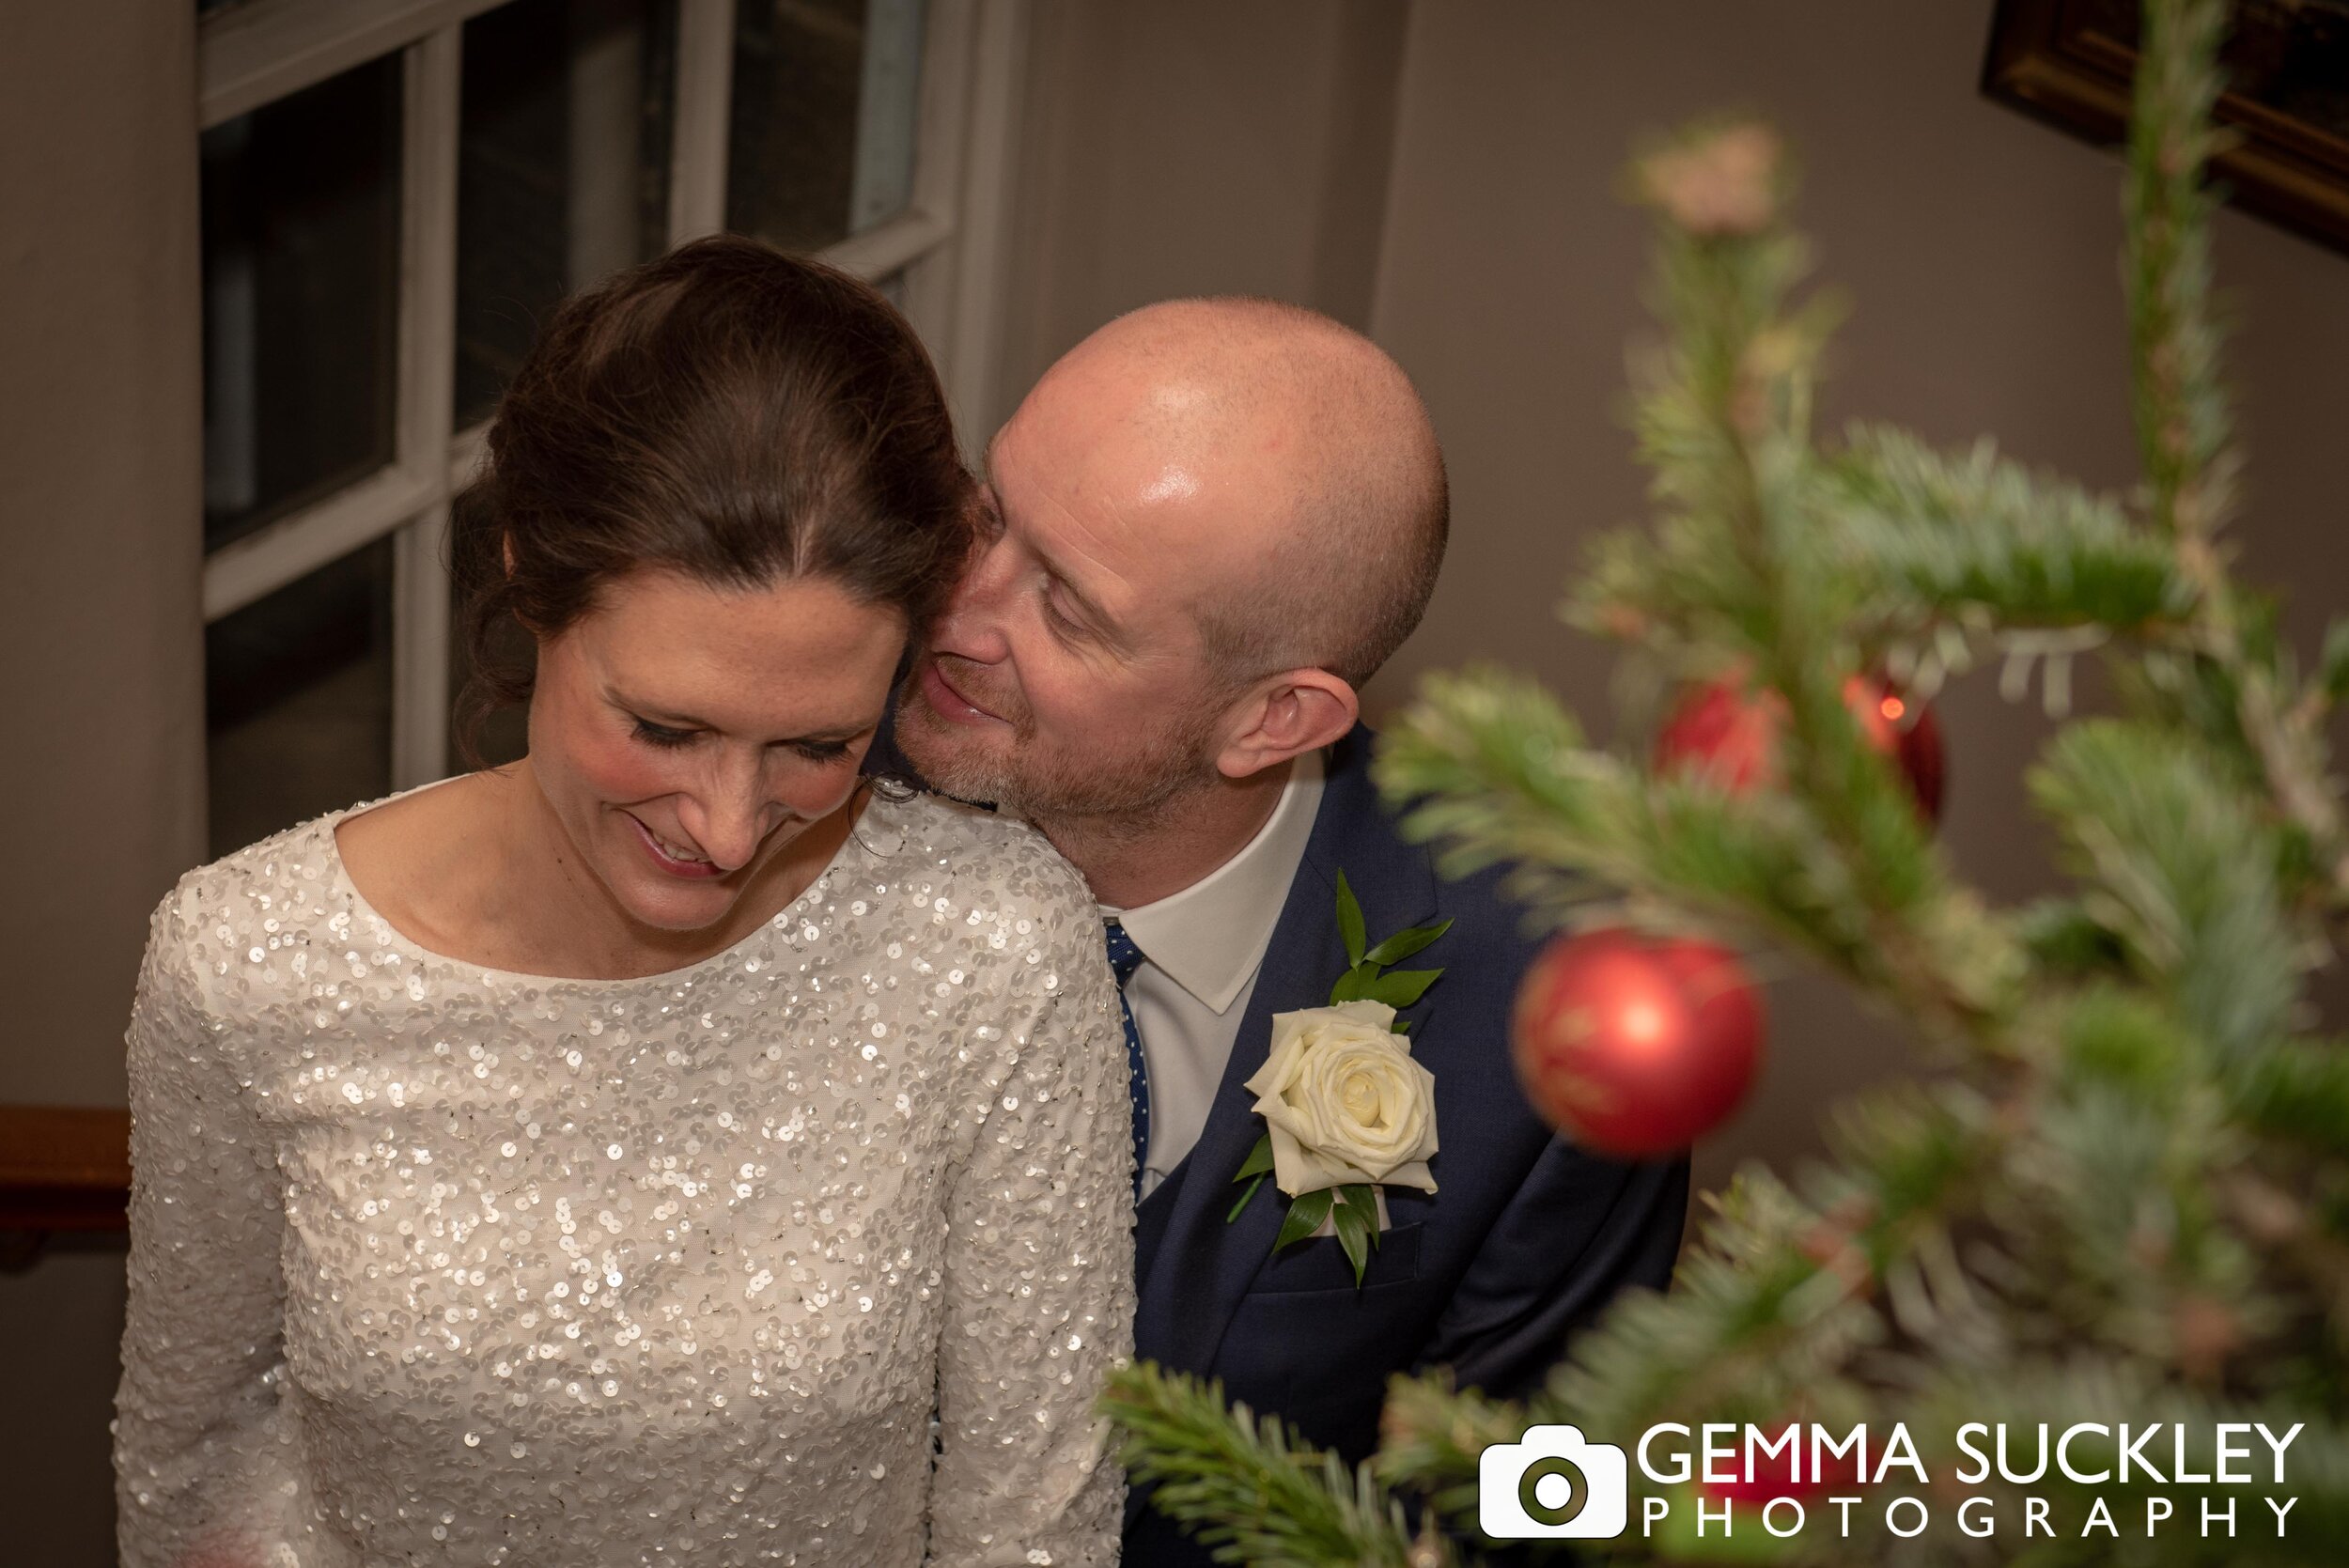 the groom kissing the bride at their christmas wedding